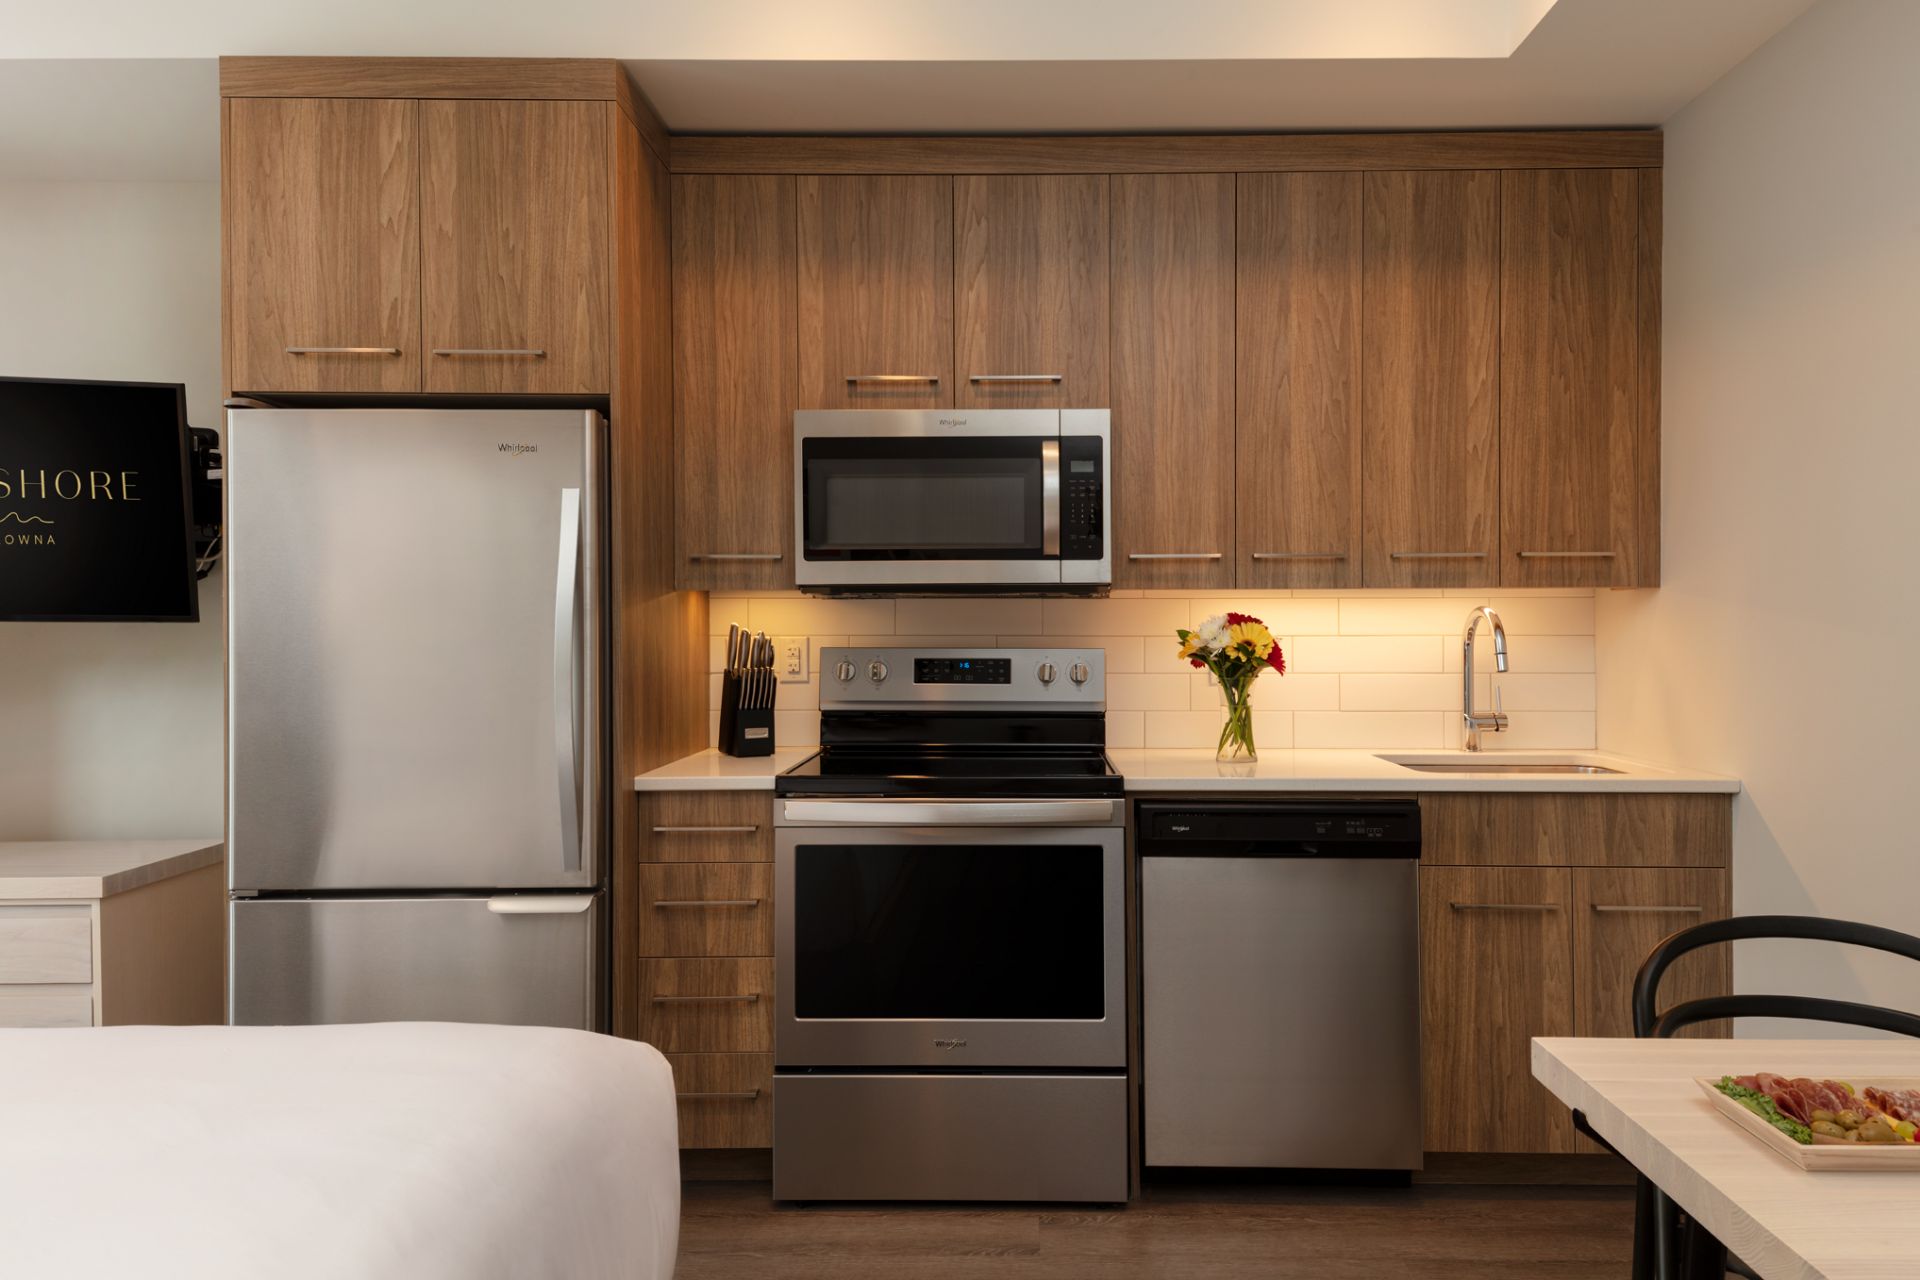 the kitchen of the studio suite at The Shore Kelowna, with stainless steel appliances and wood cabinets